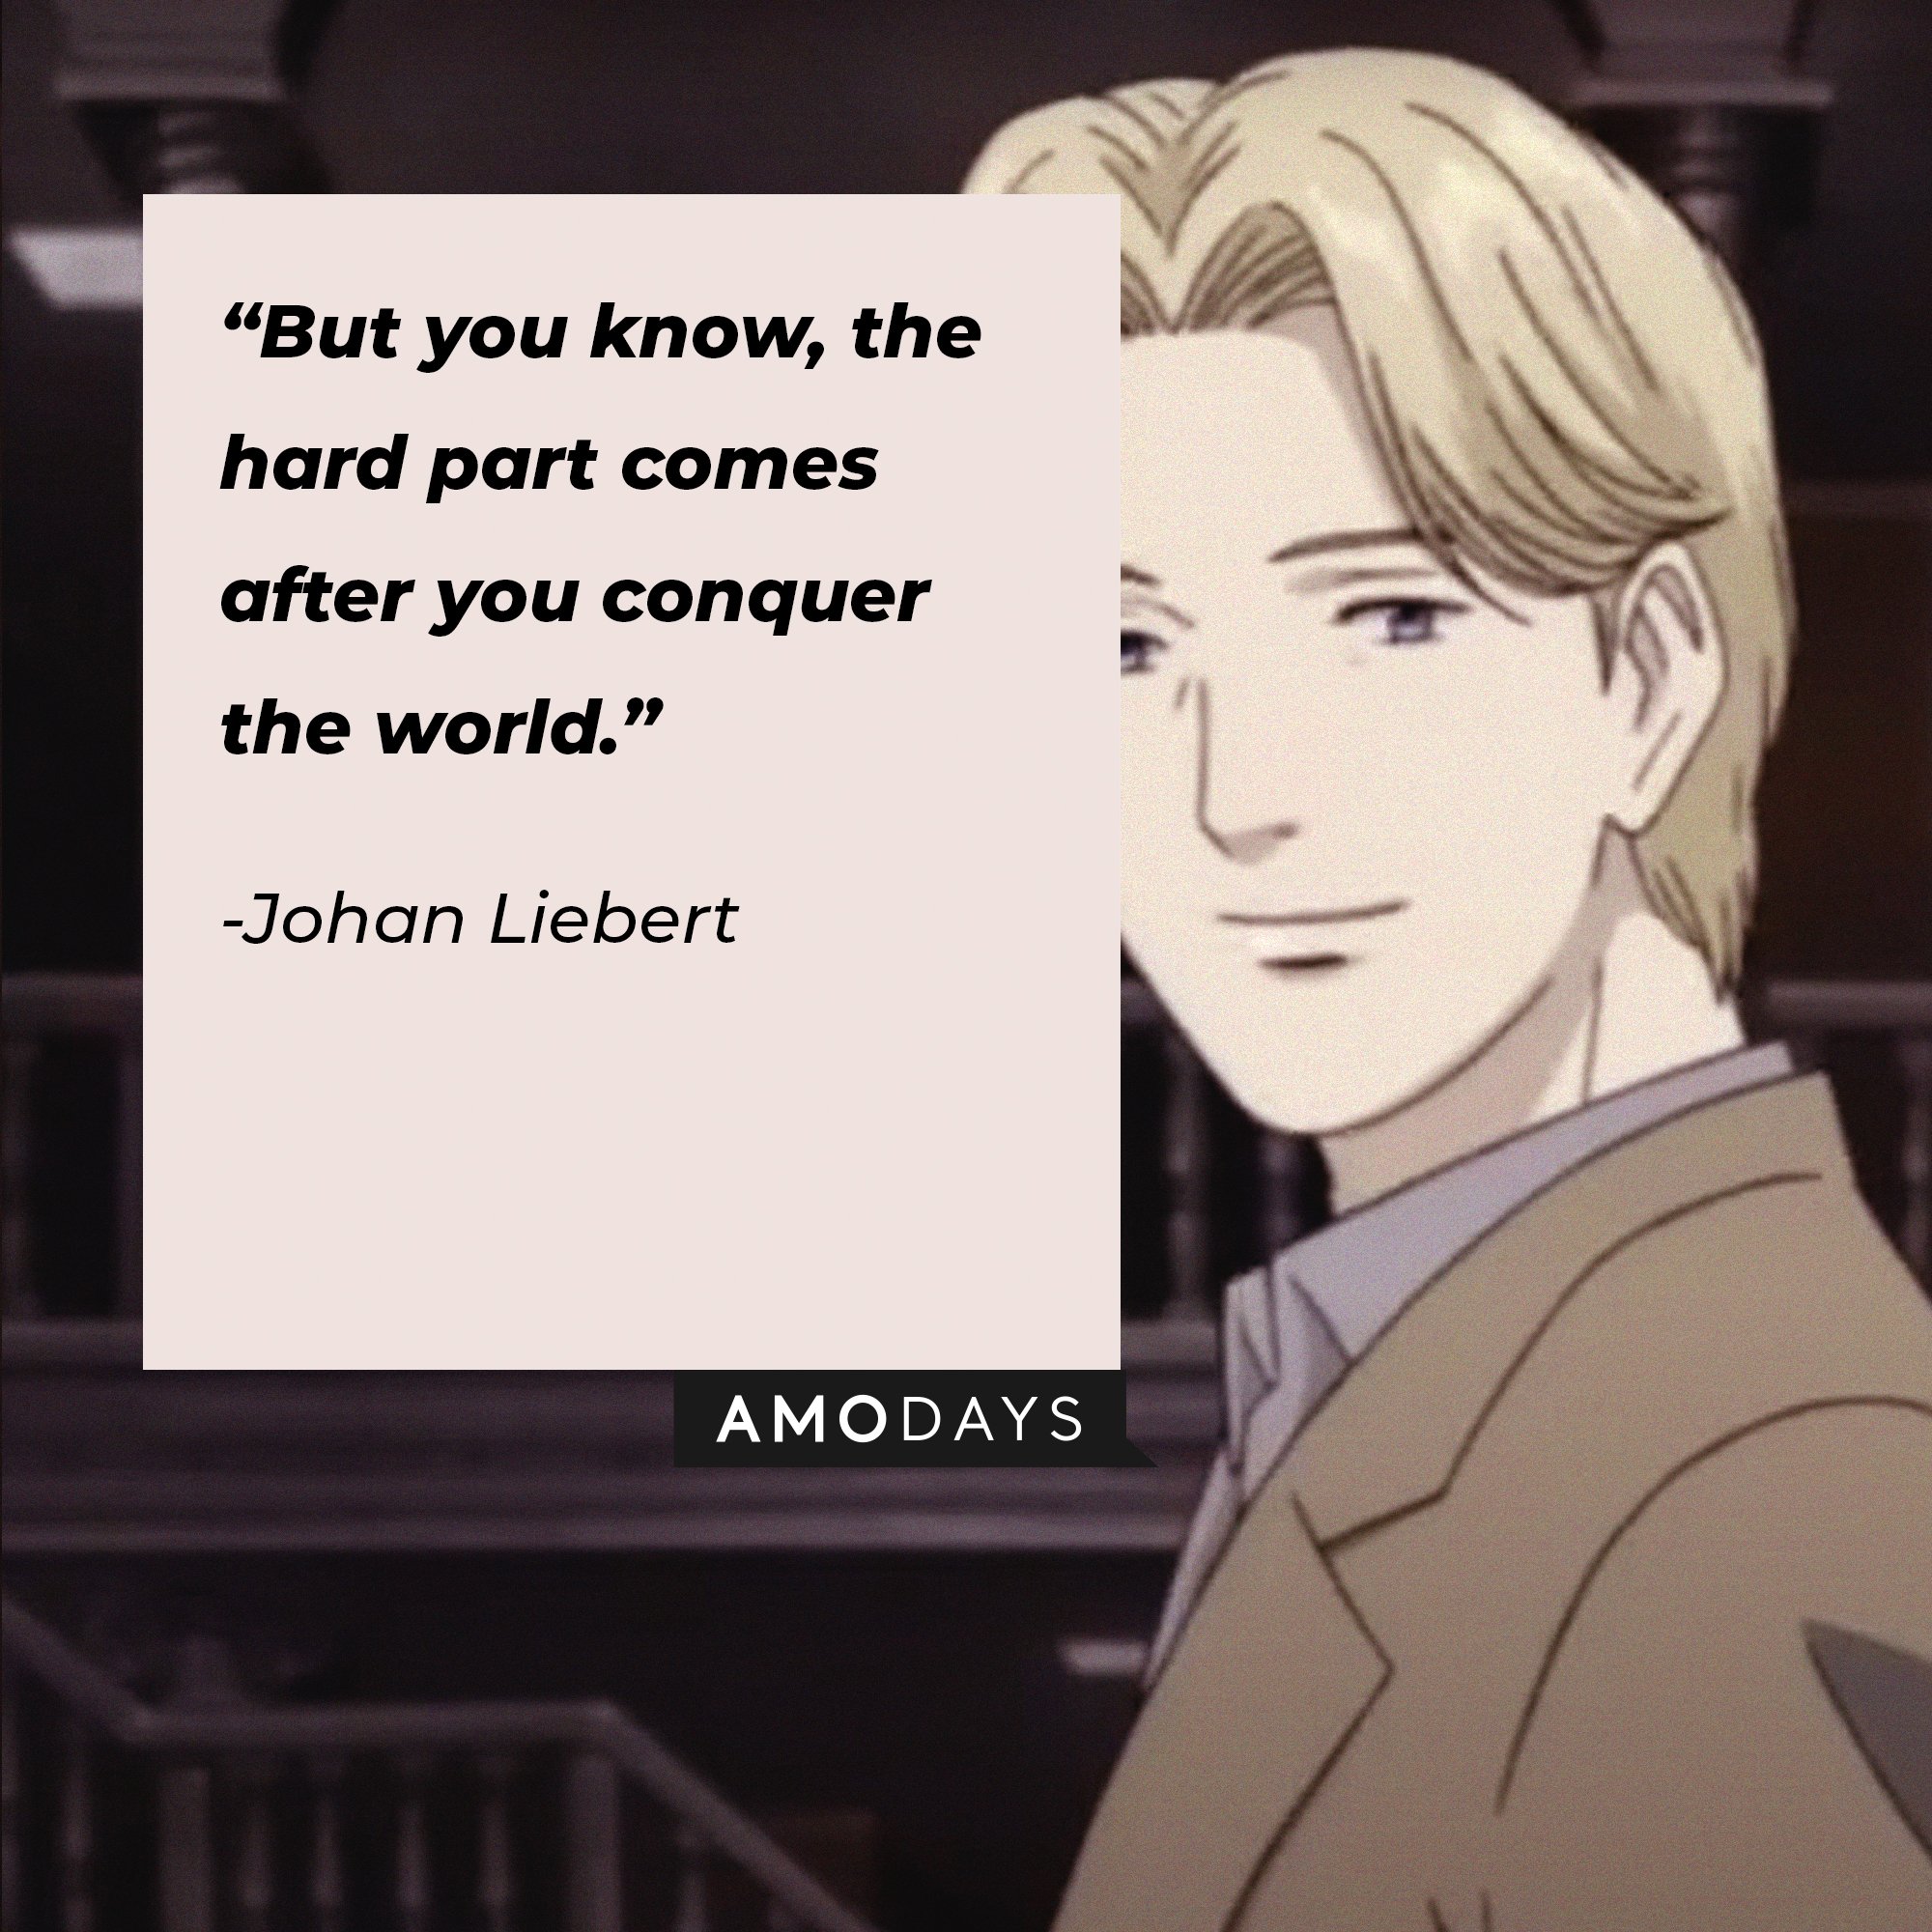 Johan Liebert’s quote: “But you know, the hard part comes after you conquer the world.”  | Image: AmoDays